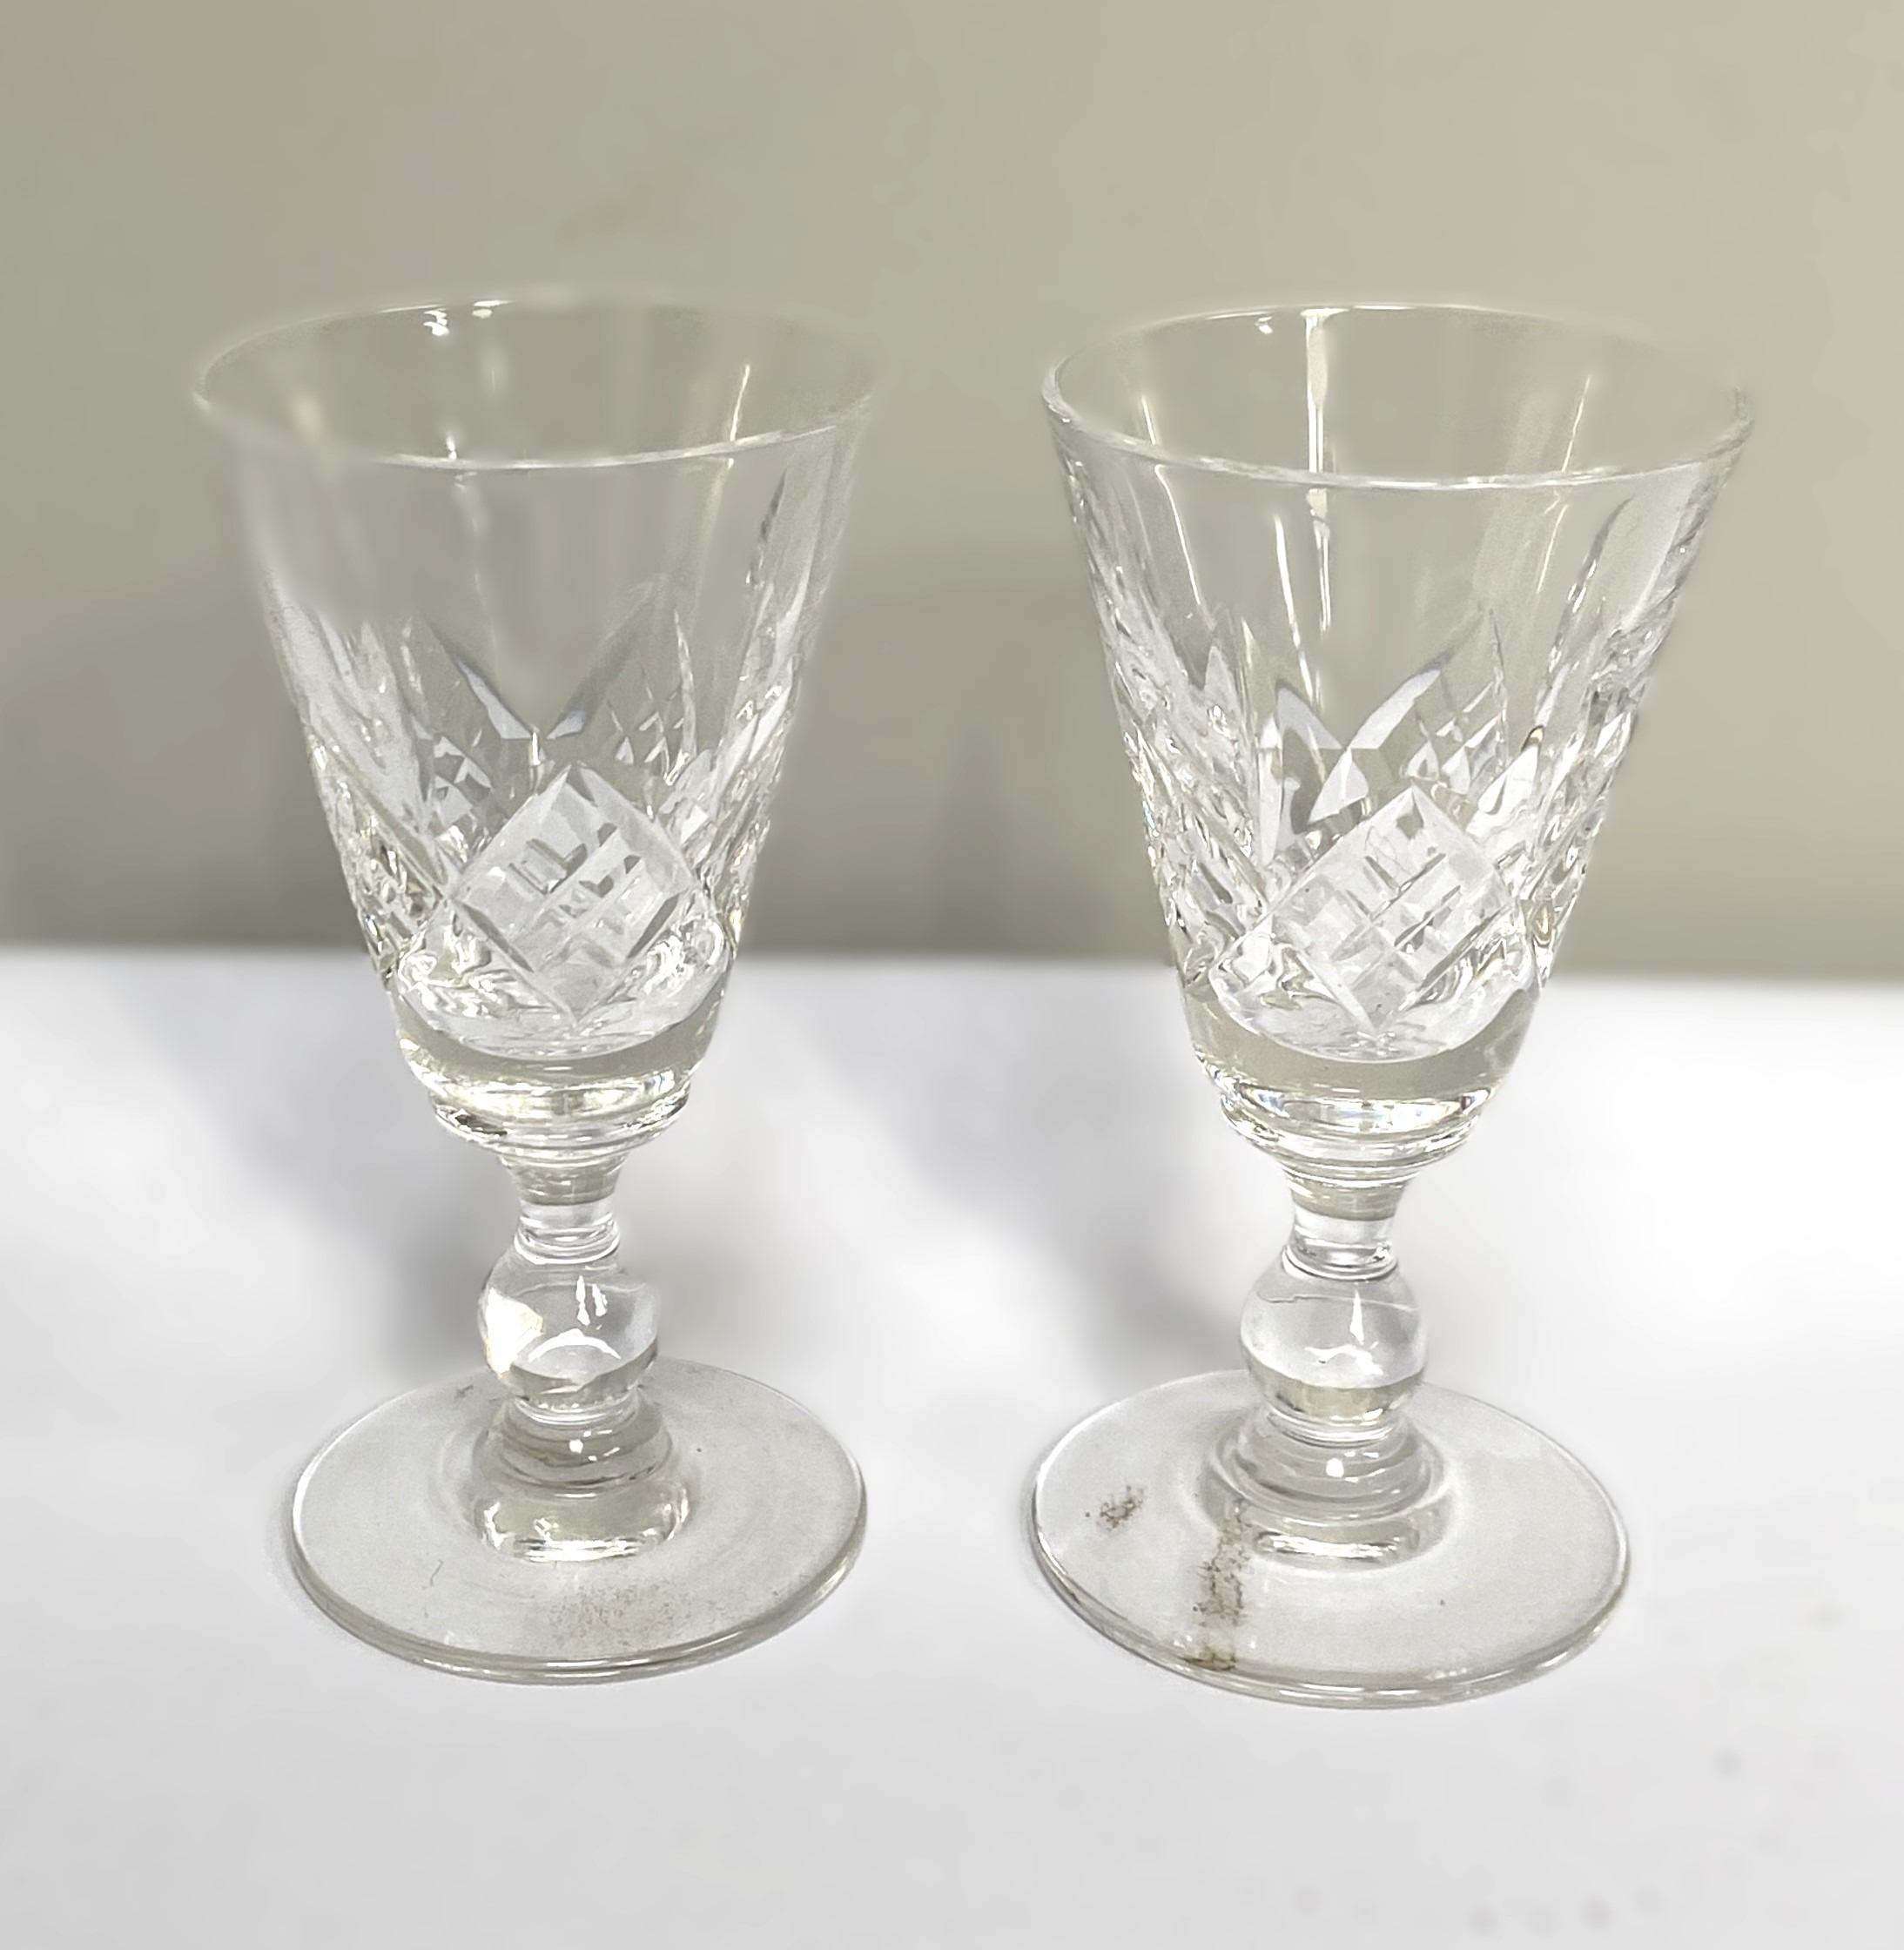 A large assortment of glassware, including a claret decanter, assorted tumblers and wine glasses, - Image 5 of 7